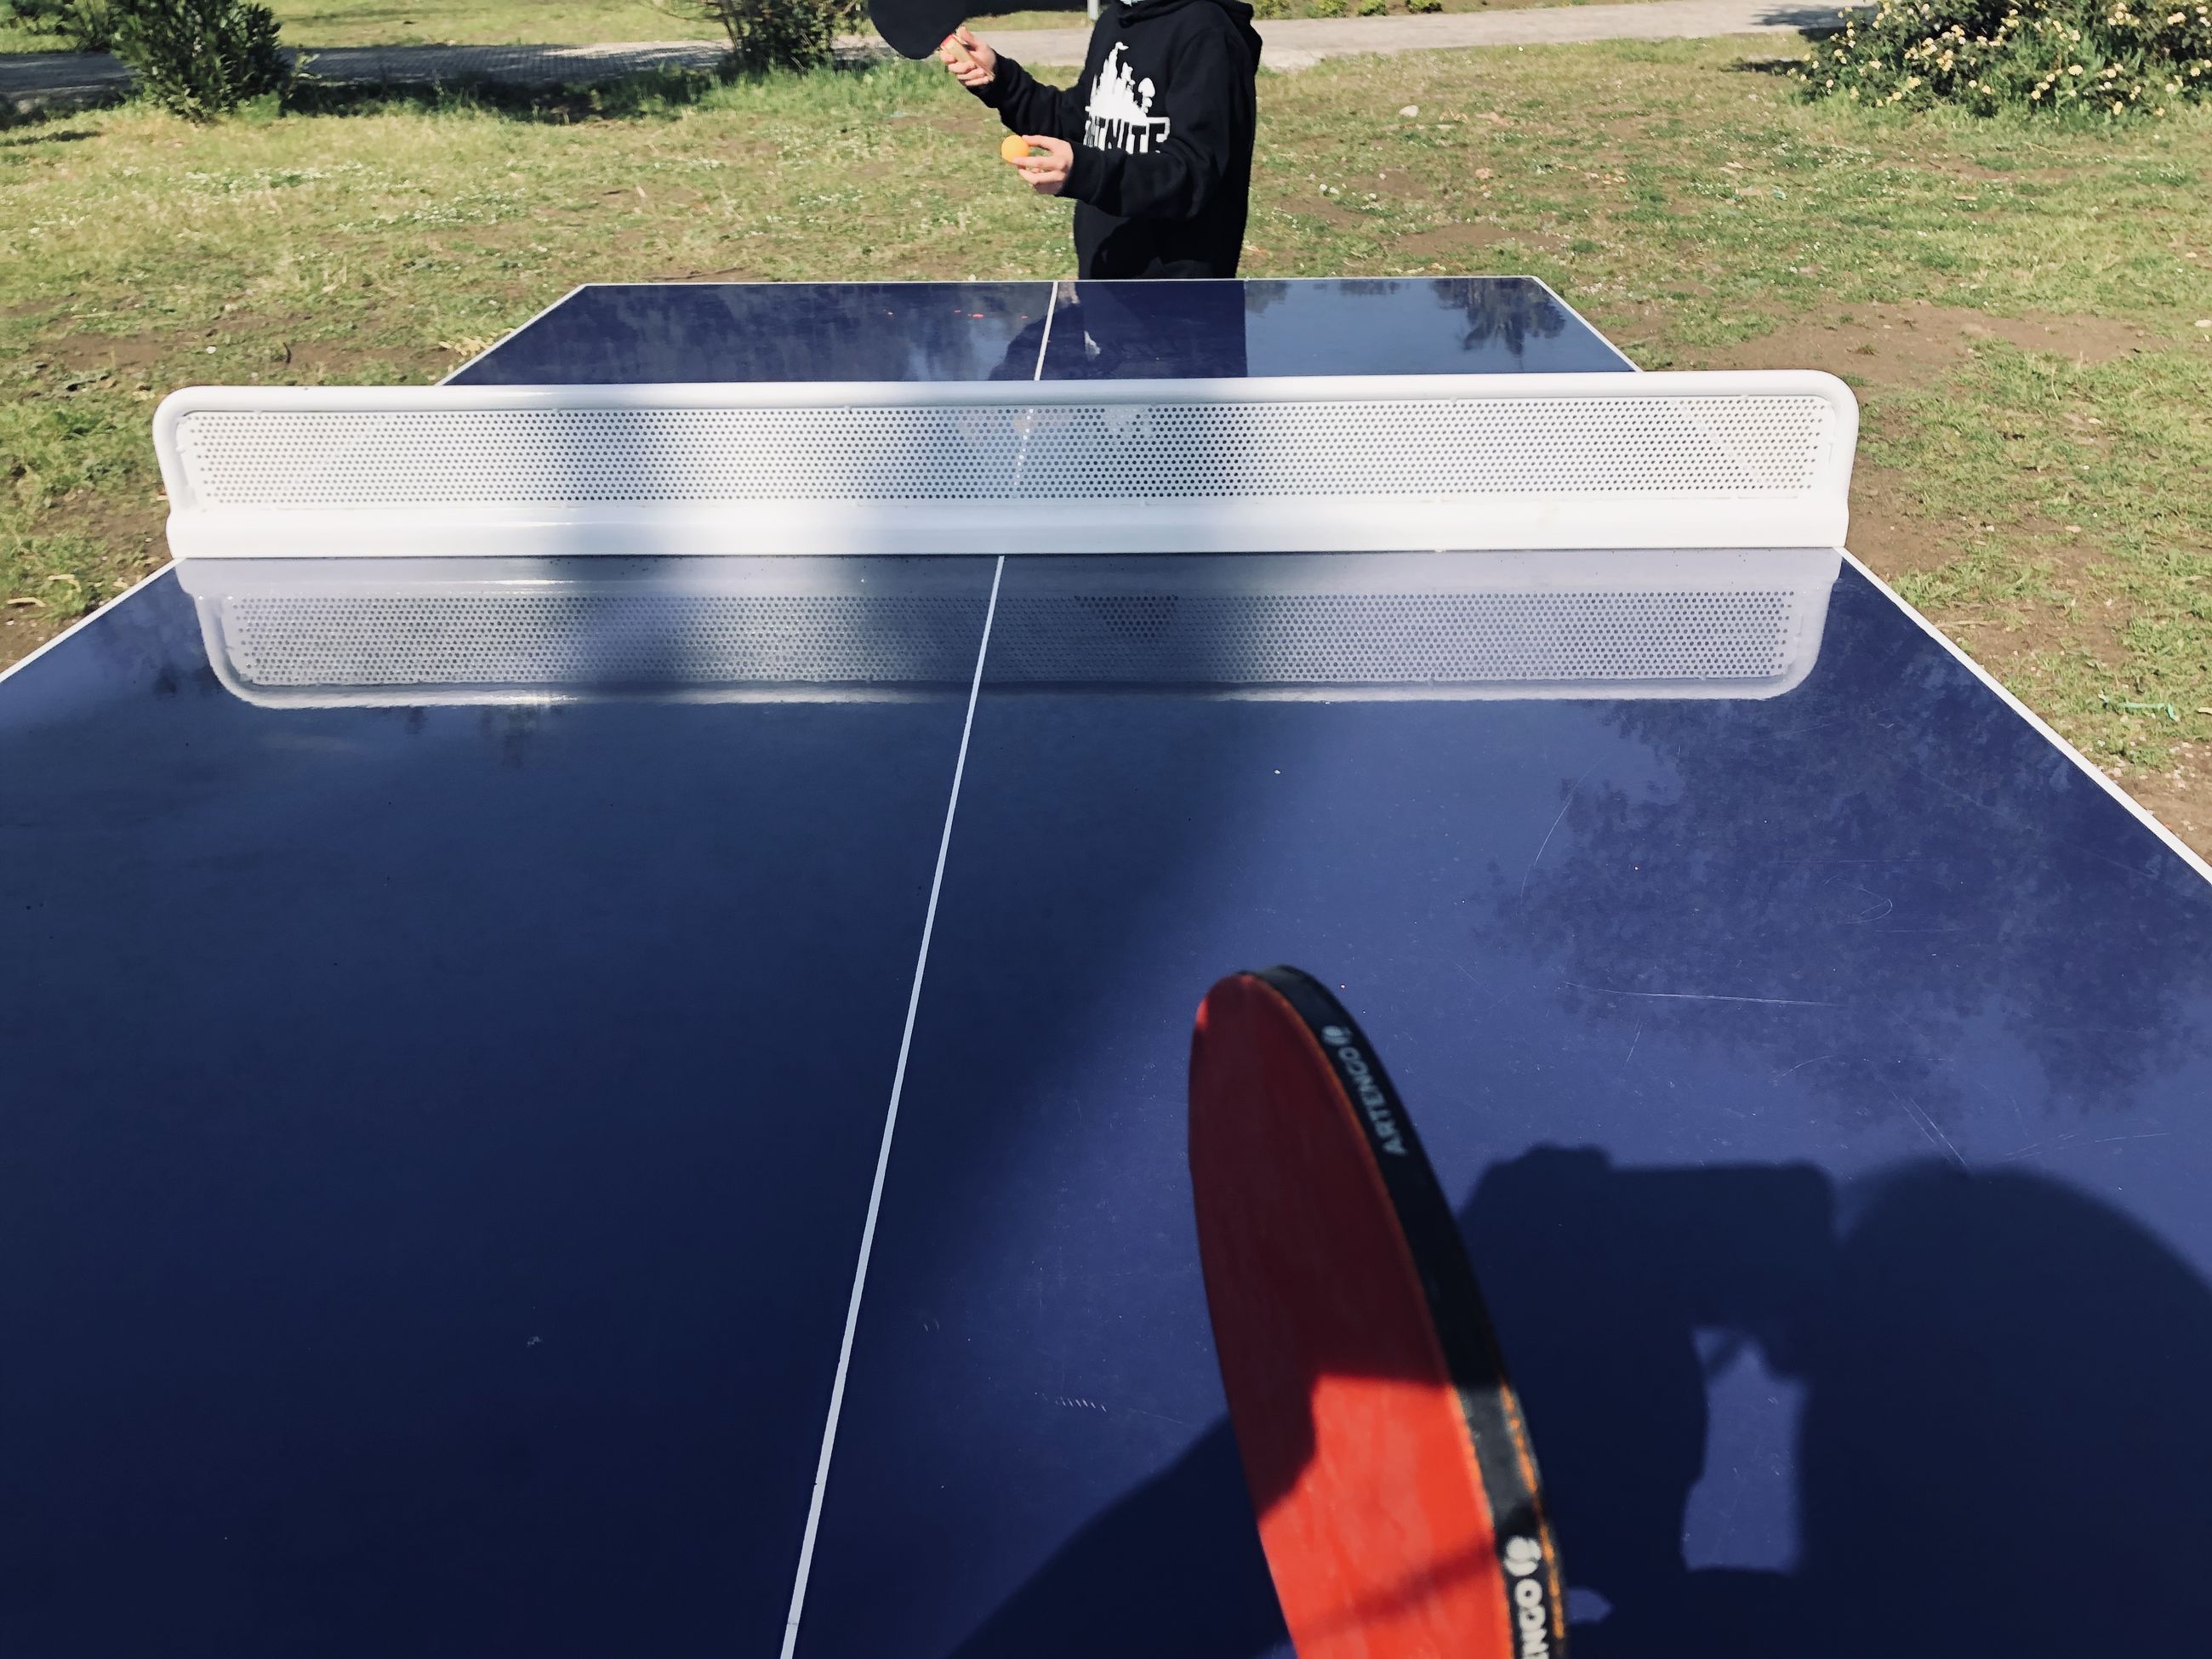 sports, leisure activity, one person, day, nature, men, lifestyles, table tennis, sports equipment, adult, outdoors, grass, plant, ping pong, sunlight